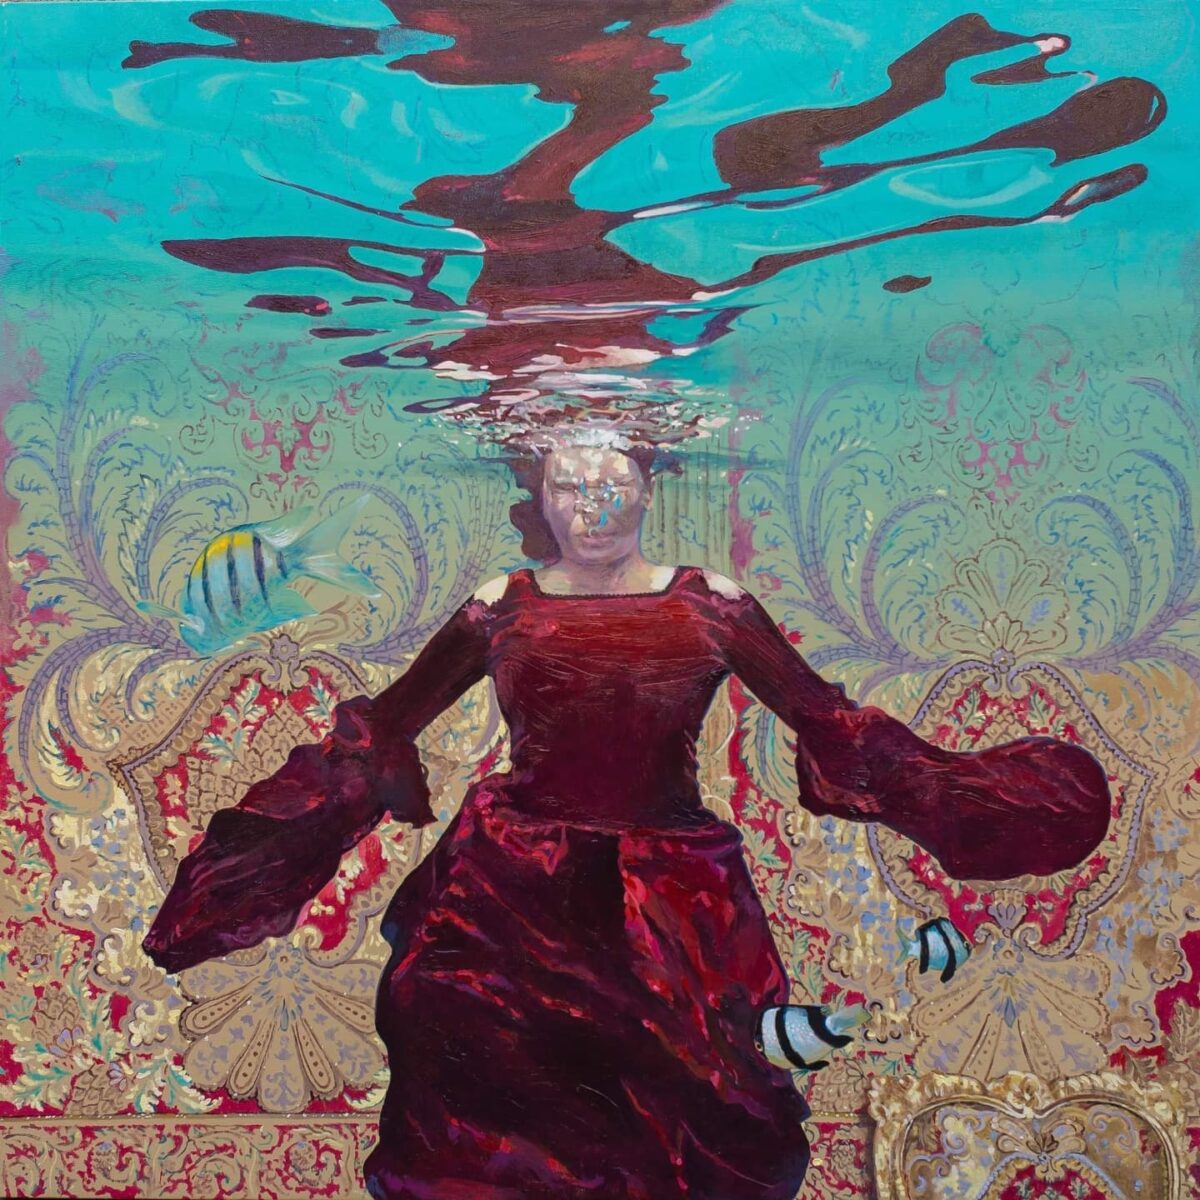 Dream Of Freedom Breathtaking Surrealistic Paintings Of Figures Floating In Flooded Rooms By Ivana Zivic 1